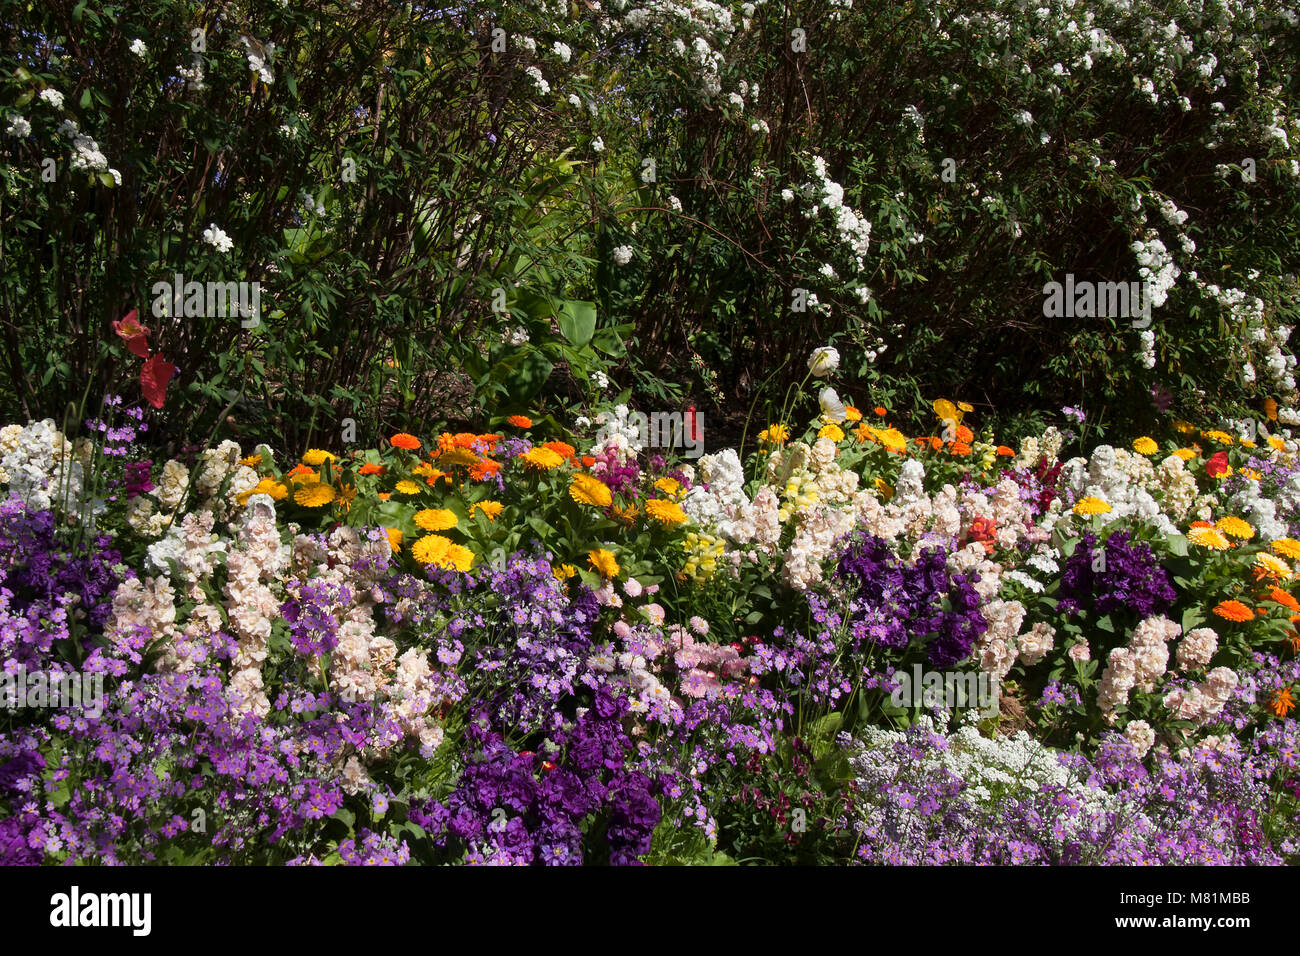 Sydney Australia, garden bed of spring flowers and may bush hedge Stock Photo